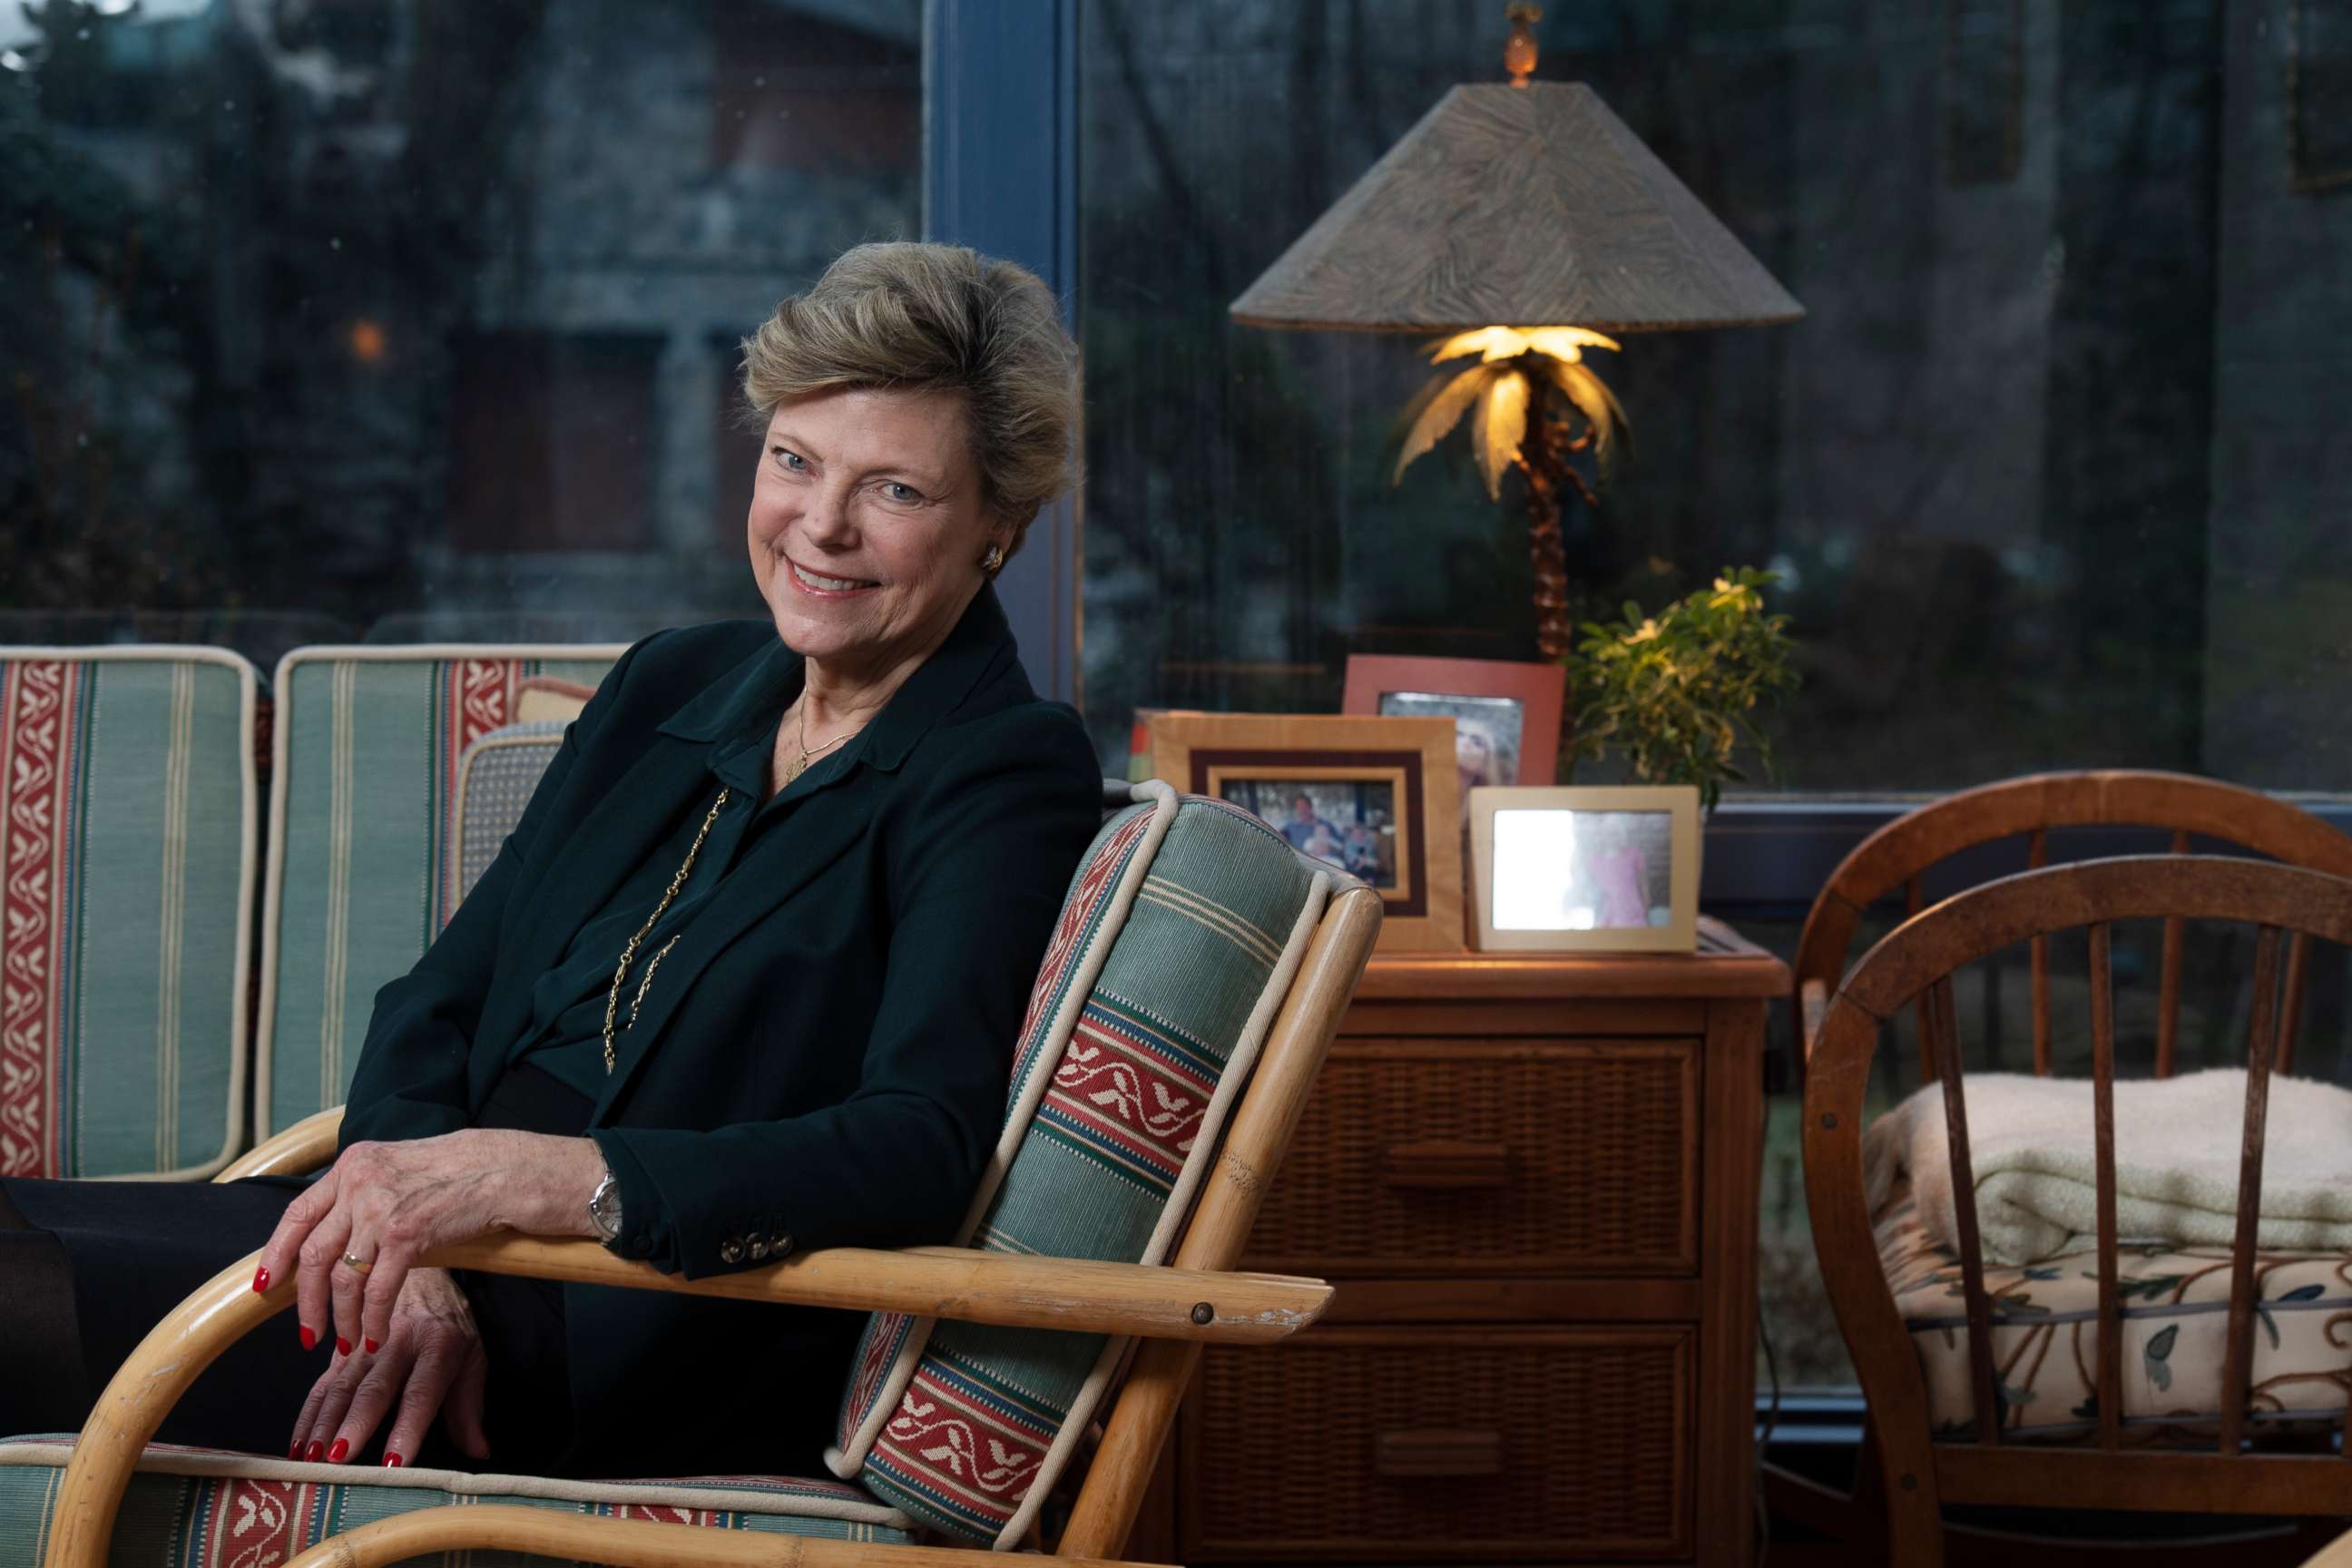 PHOTO: Journalist and author Cokie Roberts photographed in her home in Bethesda, Maryland on February 05, 2019.